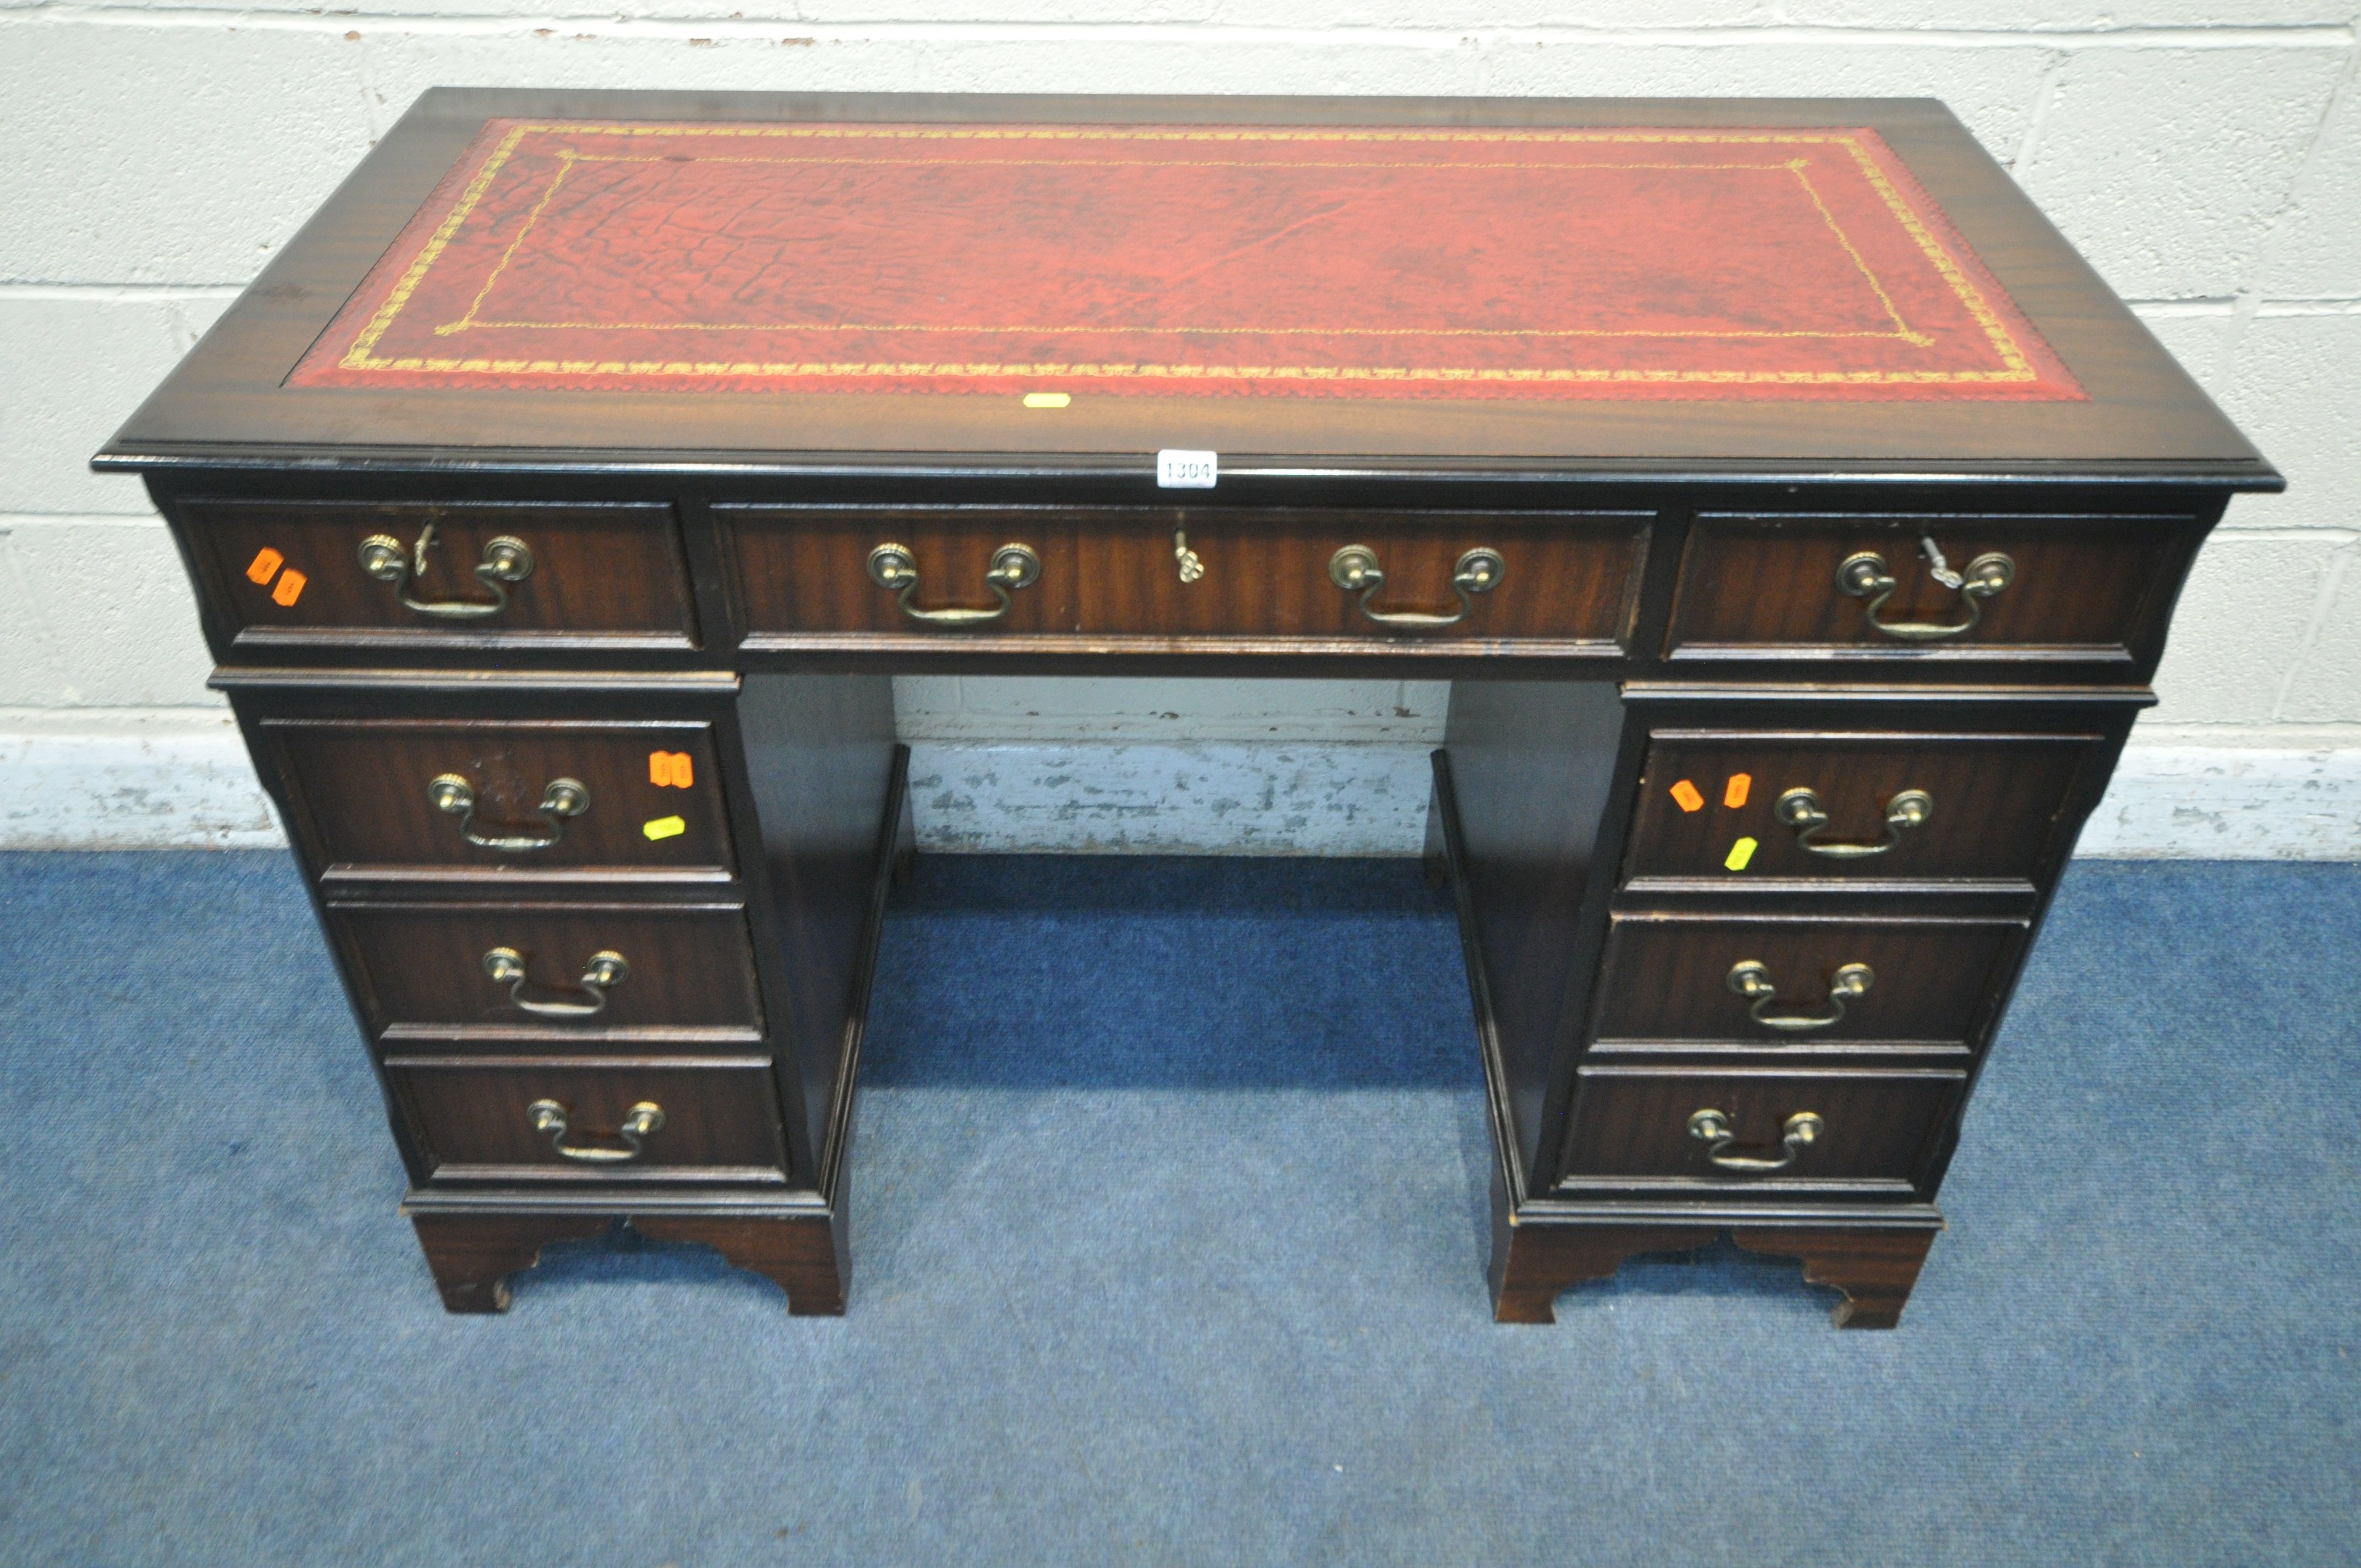 A 20TH CENTURY MAHOGANY TWIN PEDESTAL DESK, with an oxblood leather writing surface, and an